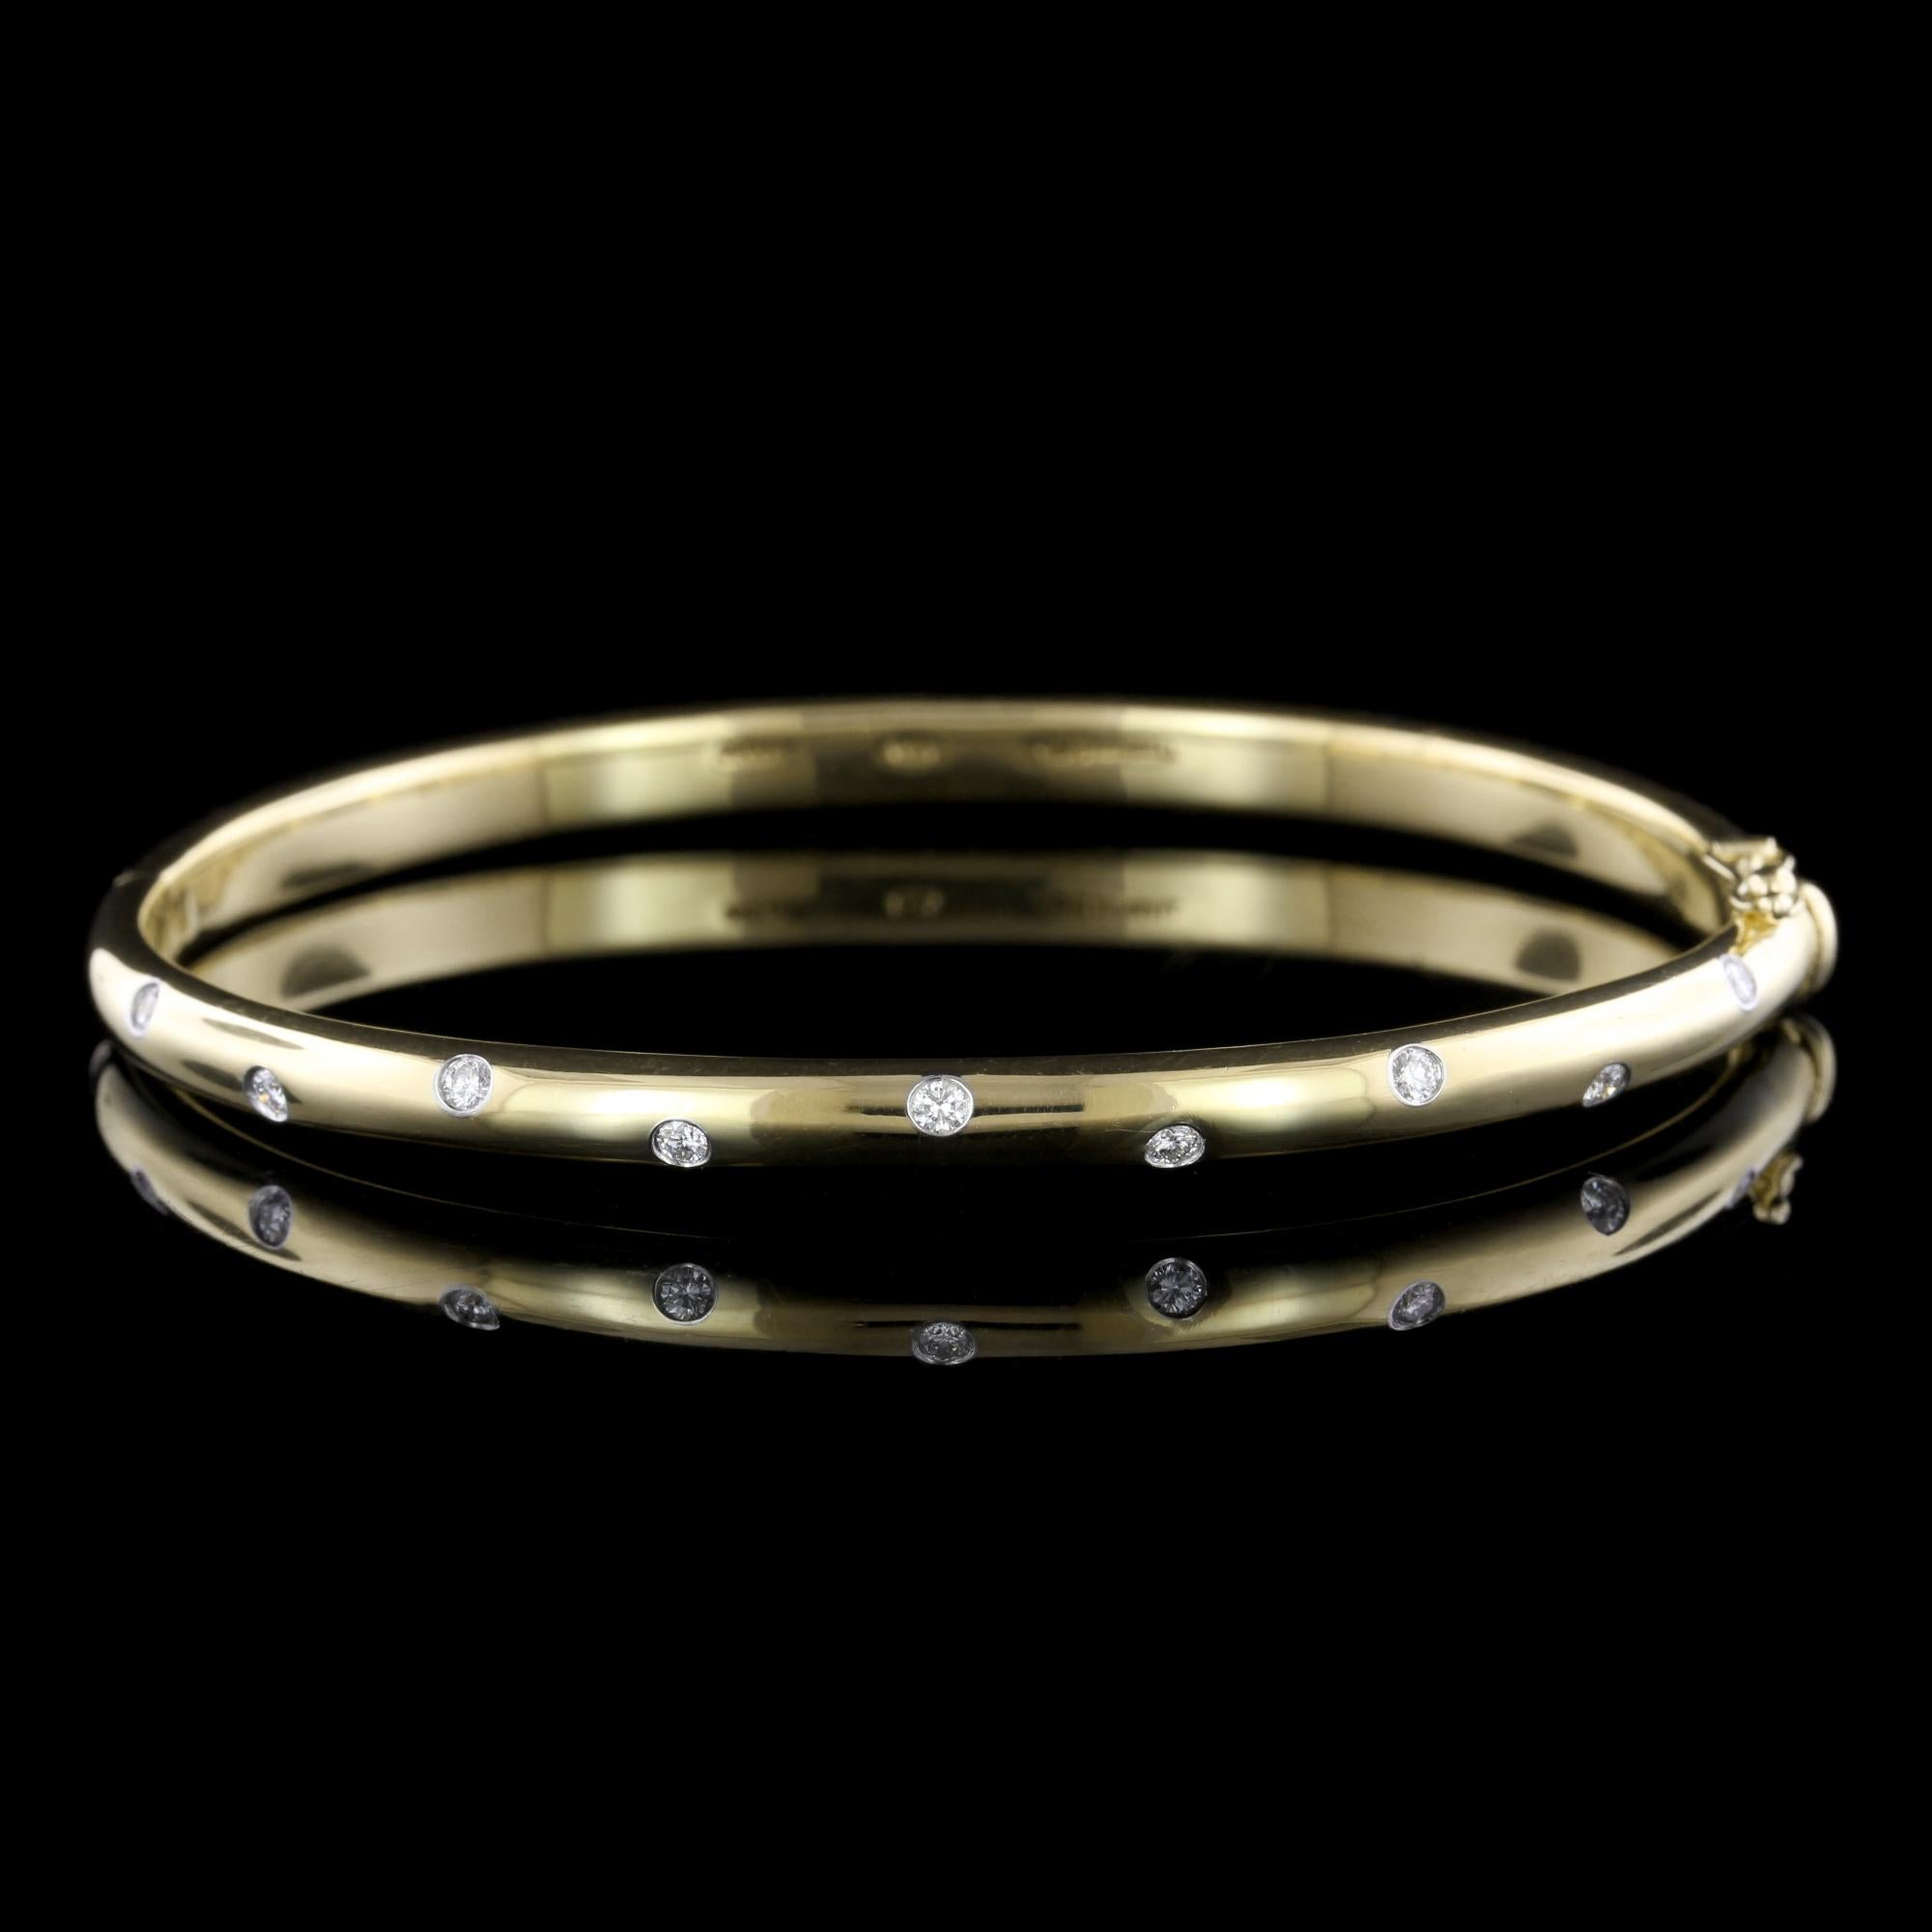 Tiffany & Co. 18K Yellow Gold and Platinum Diamond Etoile Bangle. The hinged bangle is set with ten full cut diamonds, approx. total wt. .22cts.